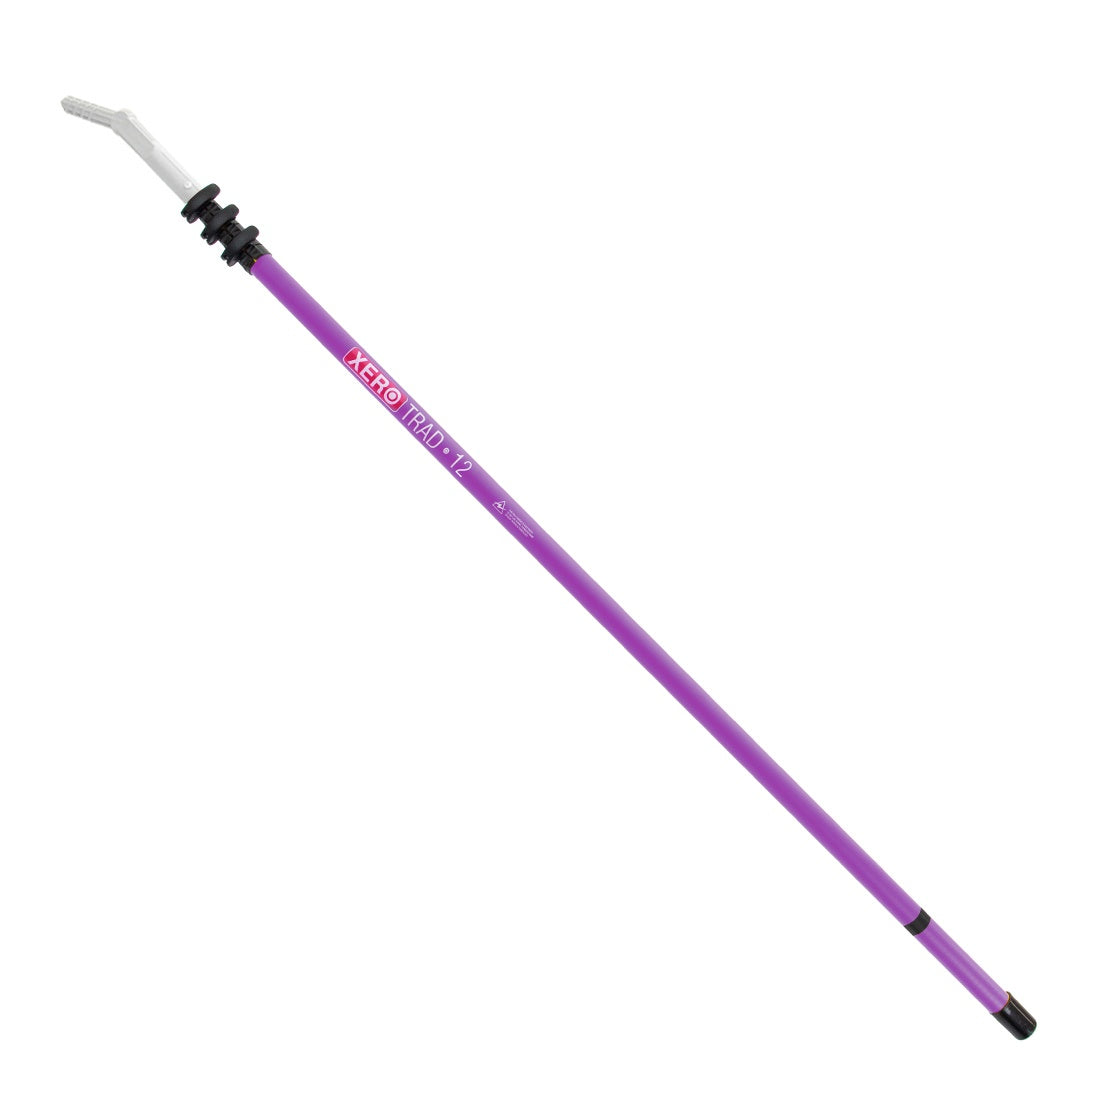 XERO Carbon Fiber Trad Pole 2.0 Wagtail Tip - Electric Purple 12 Foot Full View